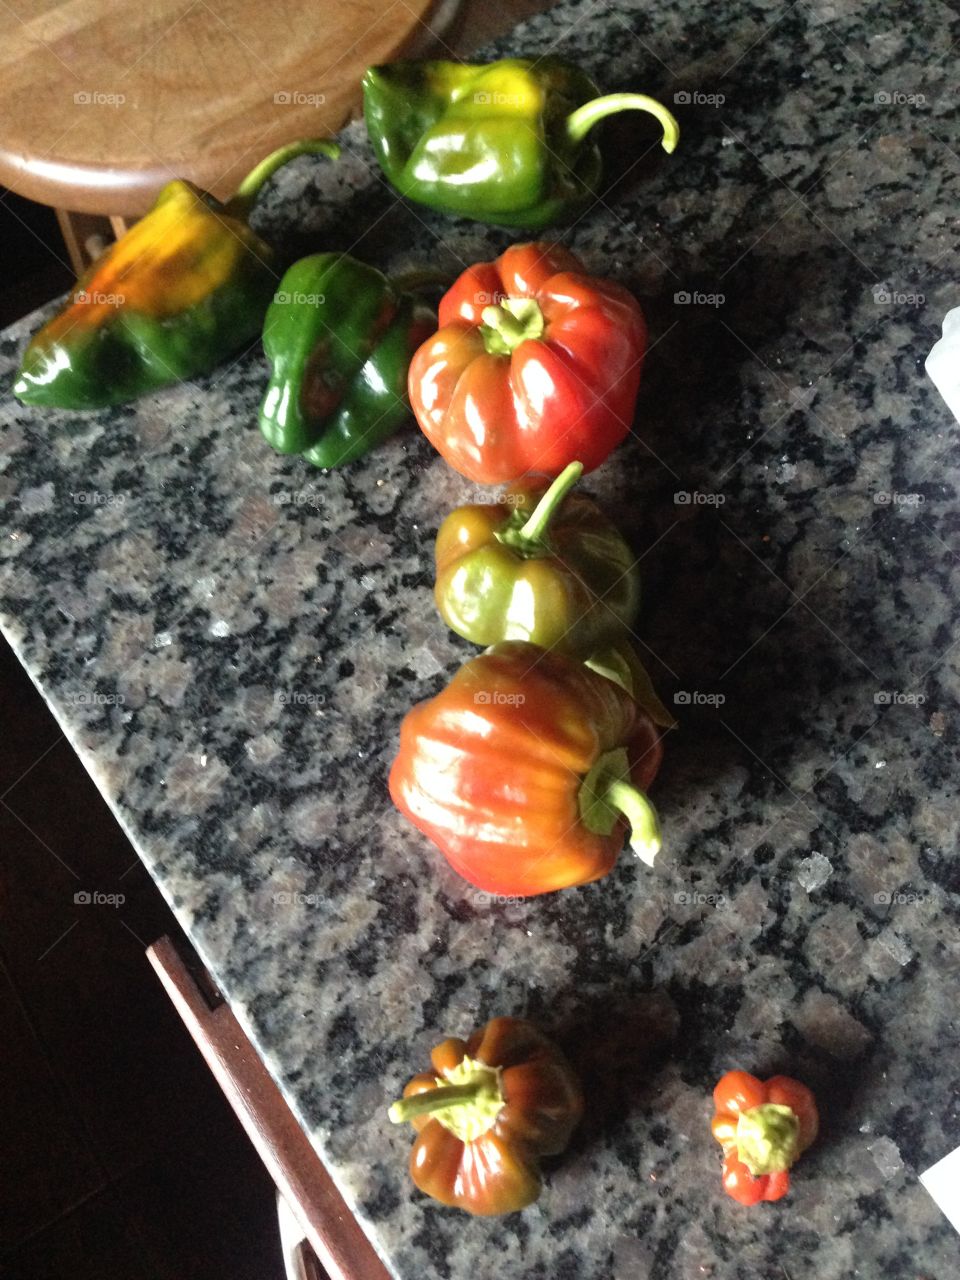 Organically grown peppers. Hungarian and Bell peppers so yummy 